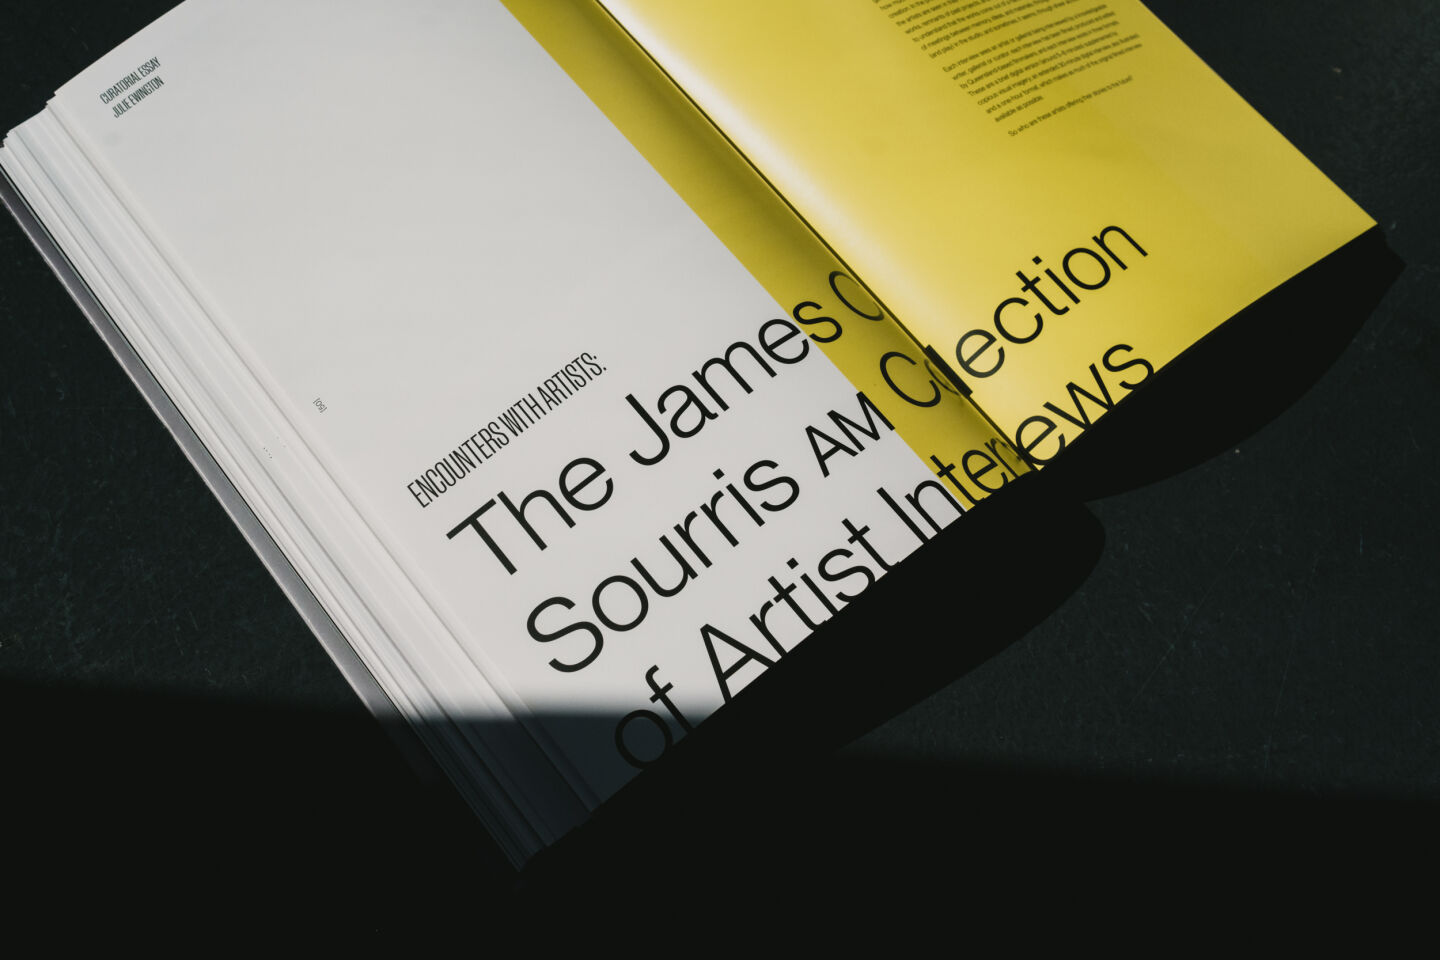 Internal spread designed for the Meet The Artists publication, featuring strong grids and typography.